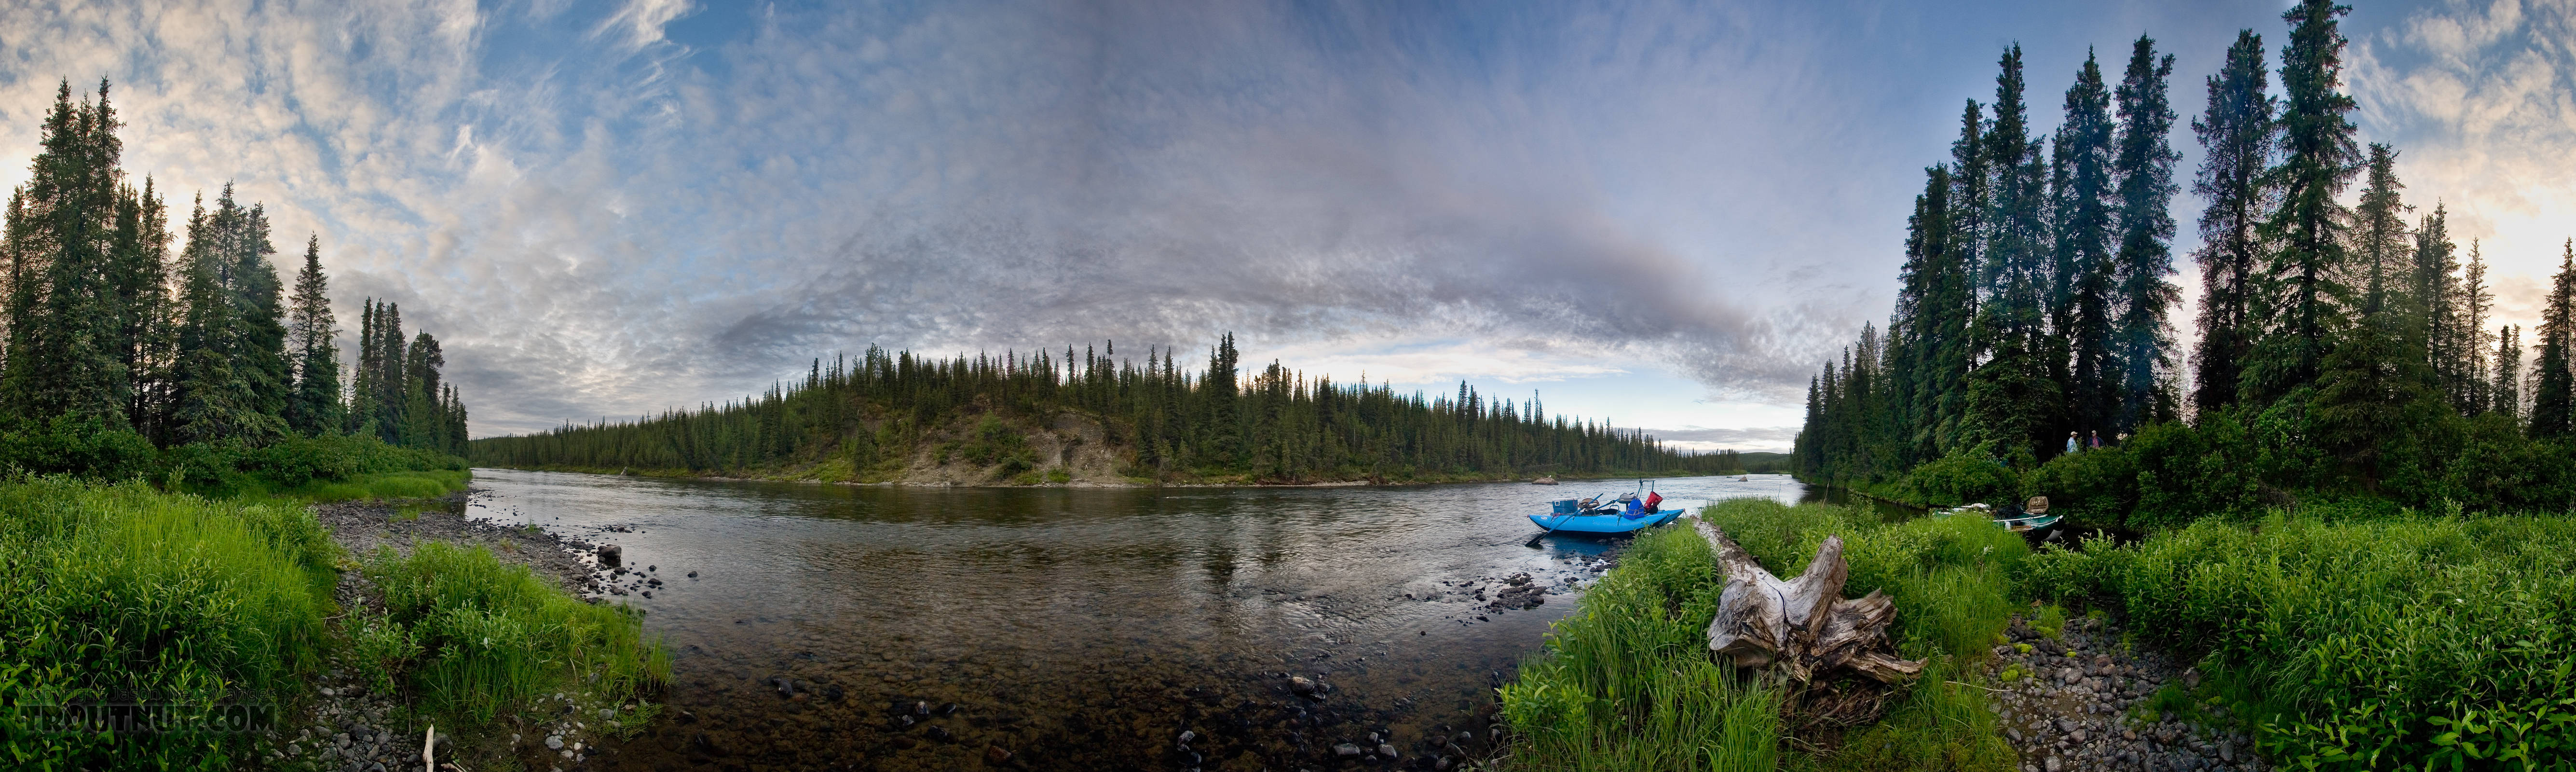 I love this 360-degree panorama of our campsite after a nice day of fishing the Gulkana.  Back in the trees my dad (on the right) is chatting with "Moose" from Blue Moose Rafting (on the left). From the Gulkana River in Alaska.